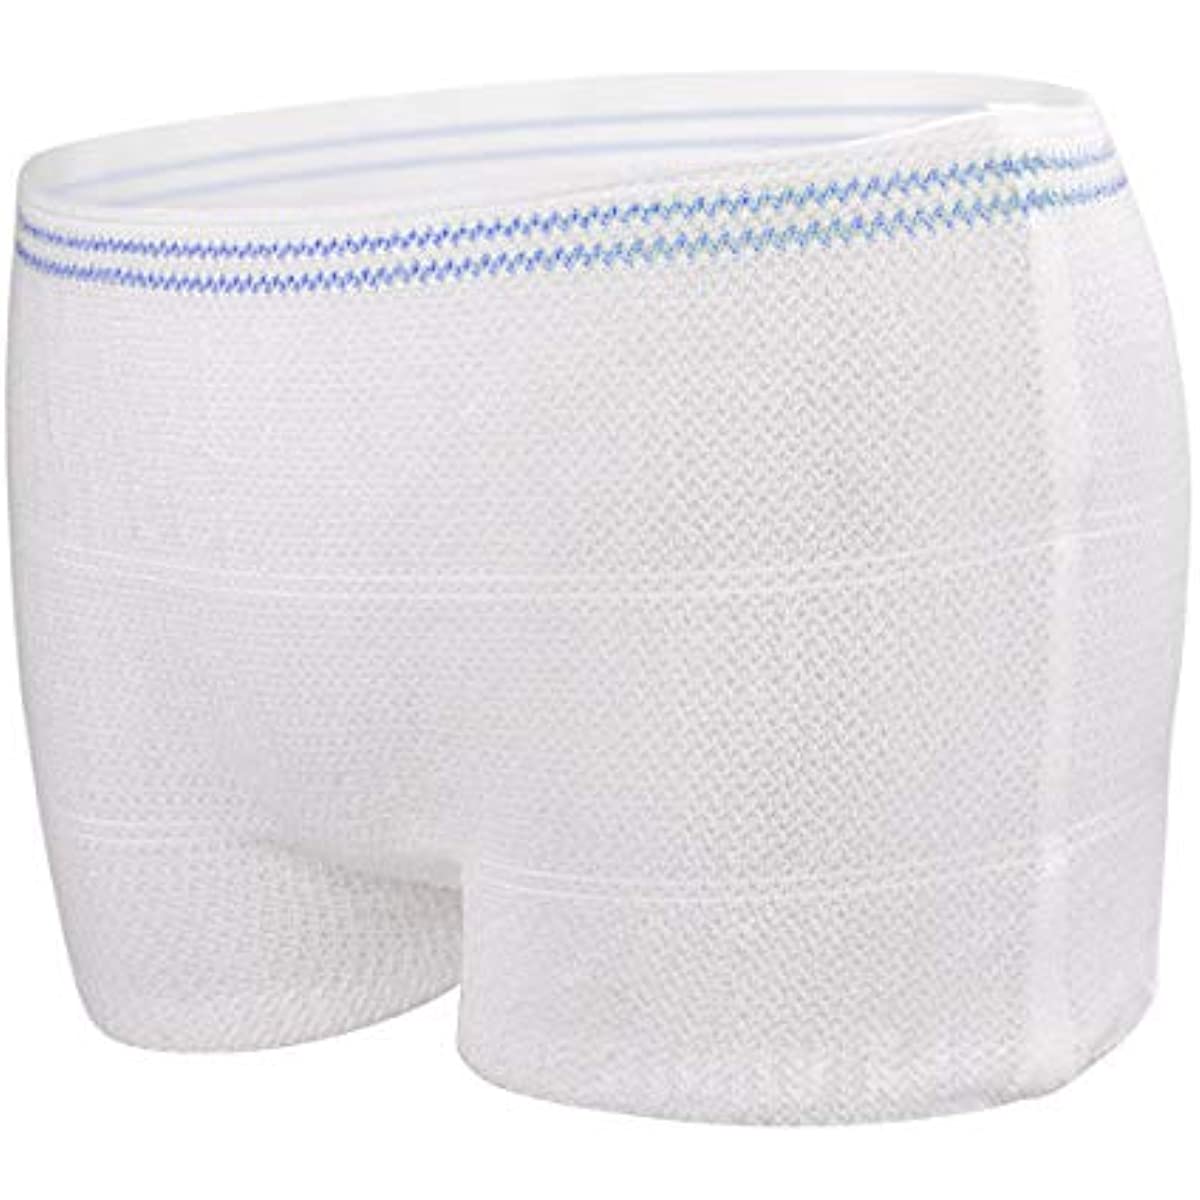 Mesh Underwear Postpartum Disposable C-Section Recovery Maternity Panties  Briefs 2721-10/20